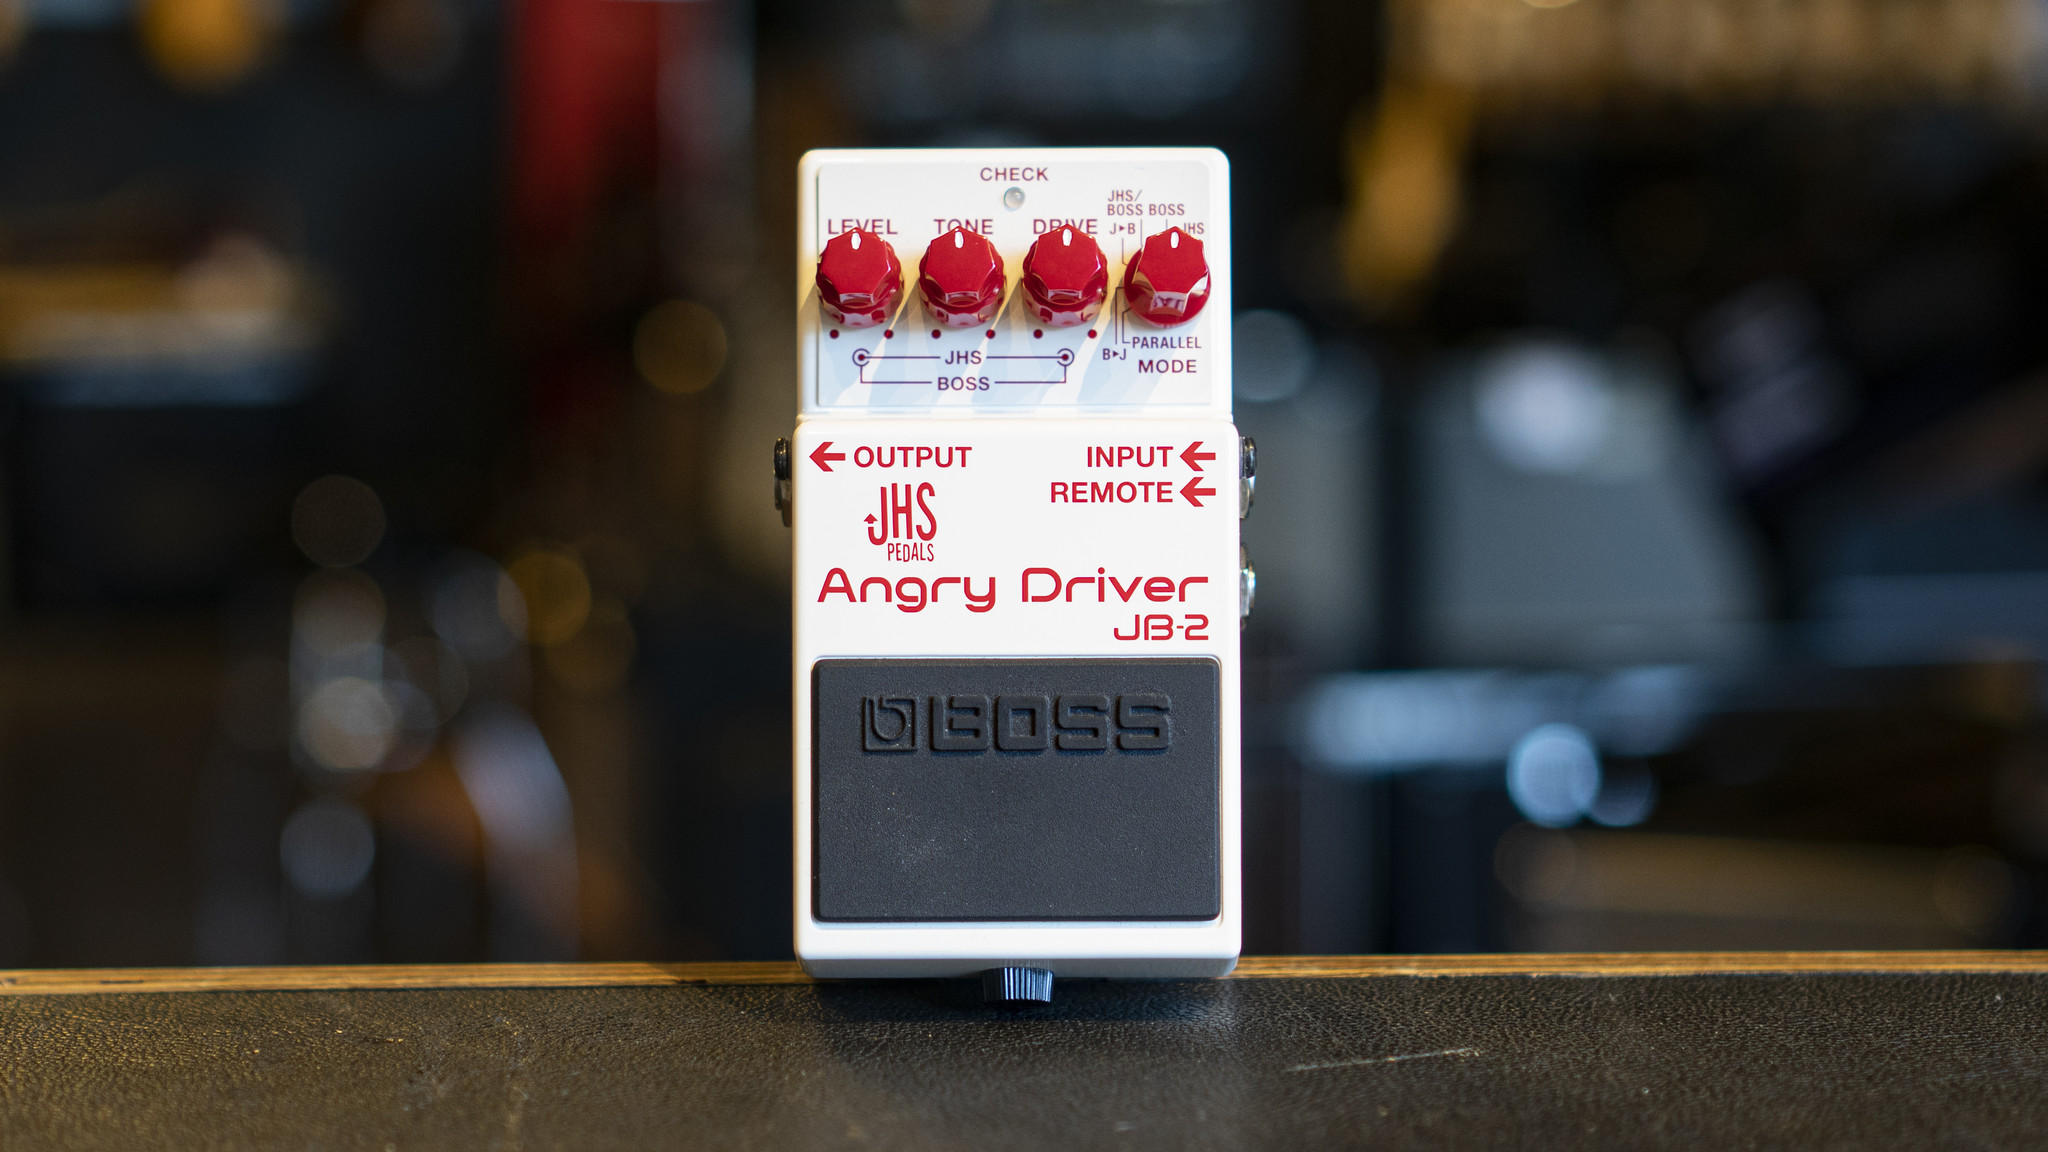 Boss Jb 2 Angry Driver Tone Tailors